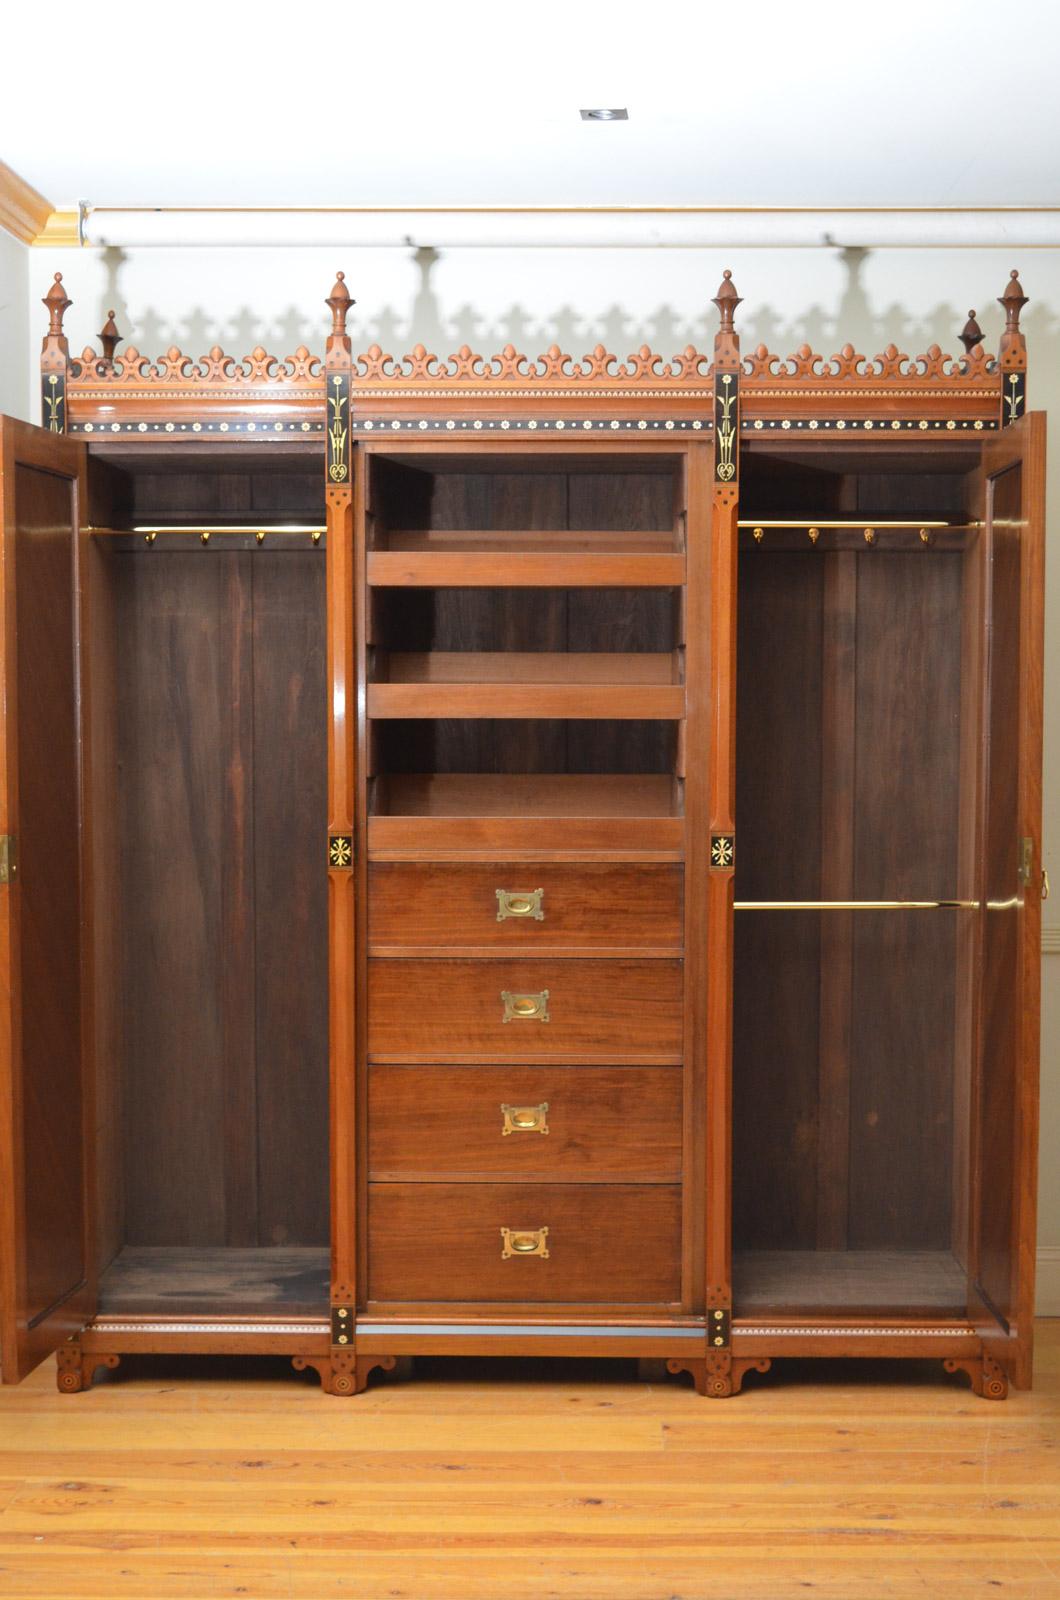 Sn4522 Superb quality walnut and coromandel Victorian 3-door wardrobe, having finely carved castellated cornice above finely inlaid frieze and centre mirrored door with original mirror with some foxing, enclosing original sliders and drawers, all